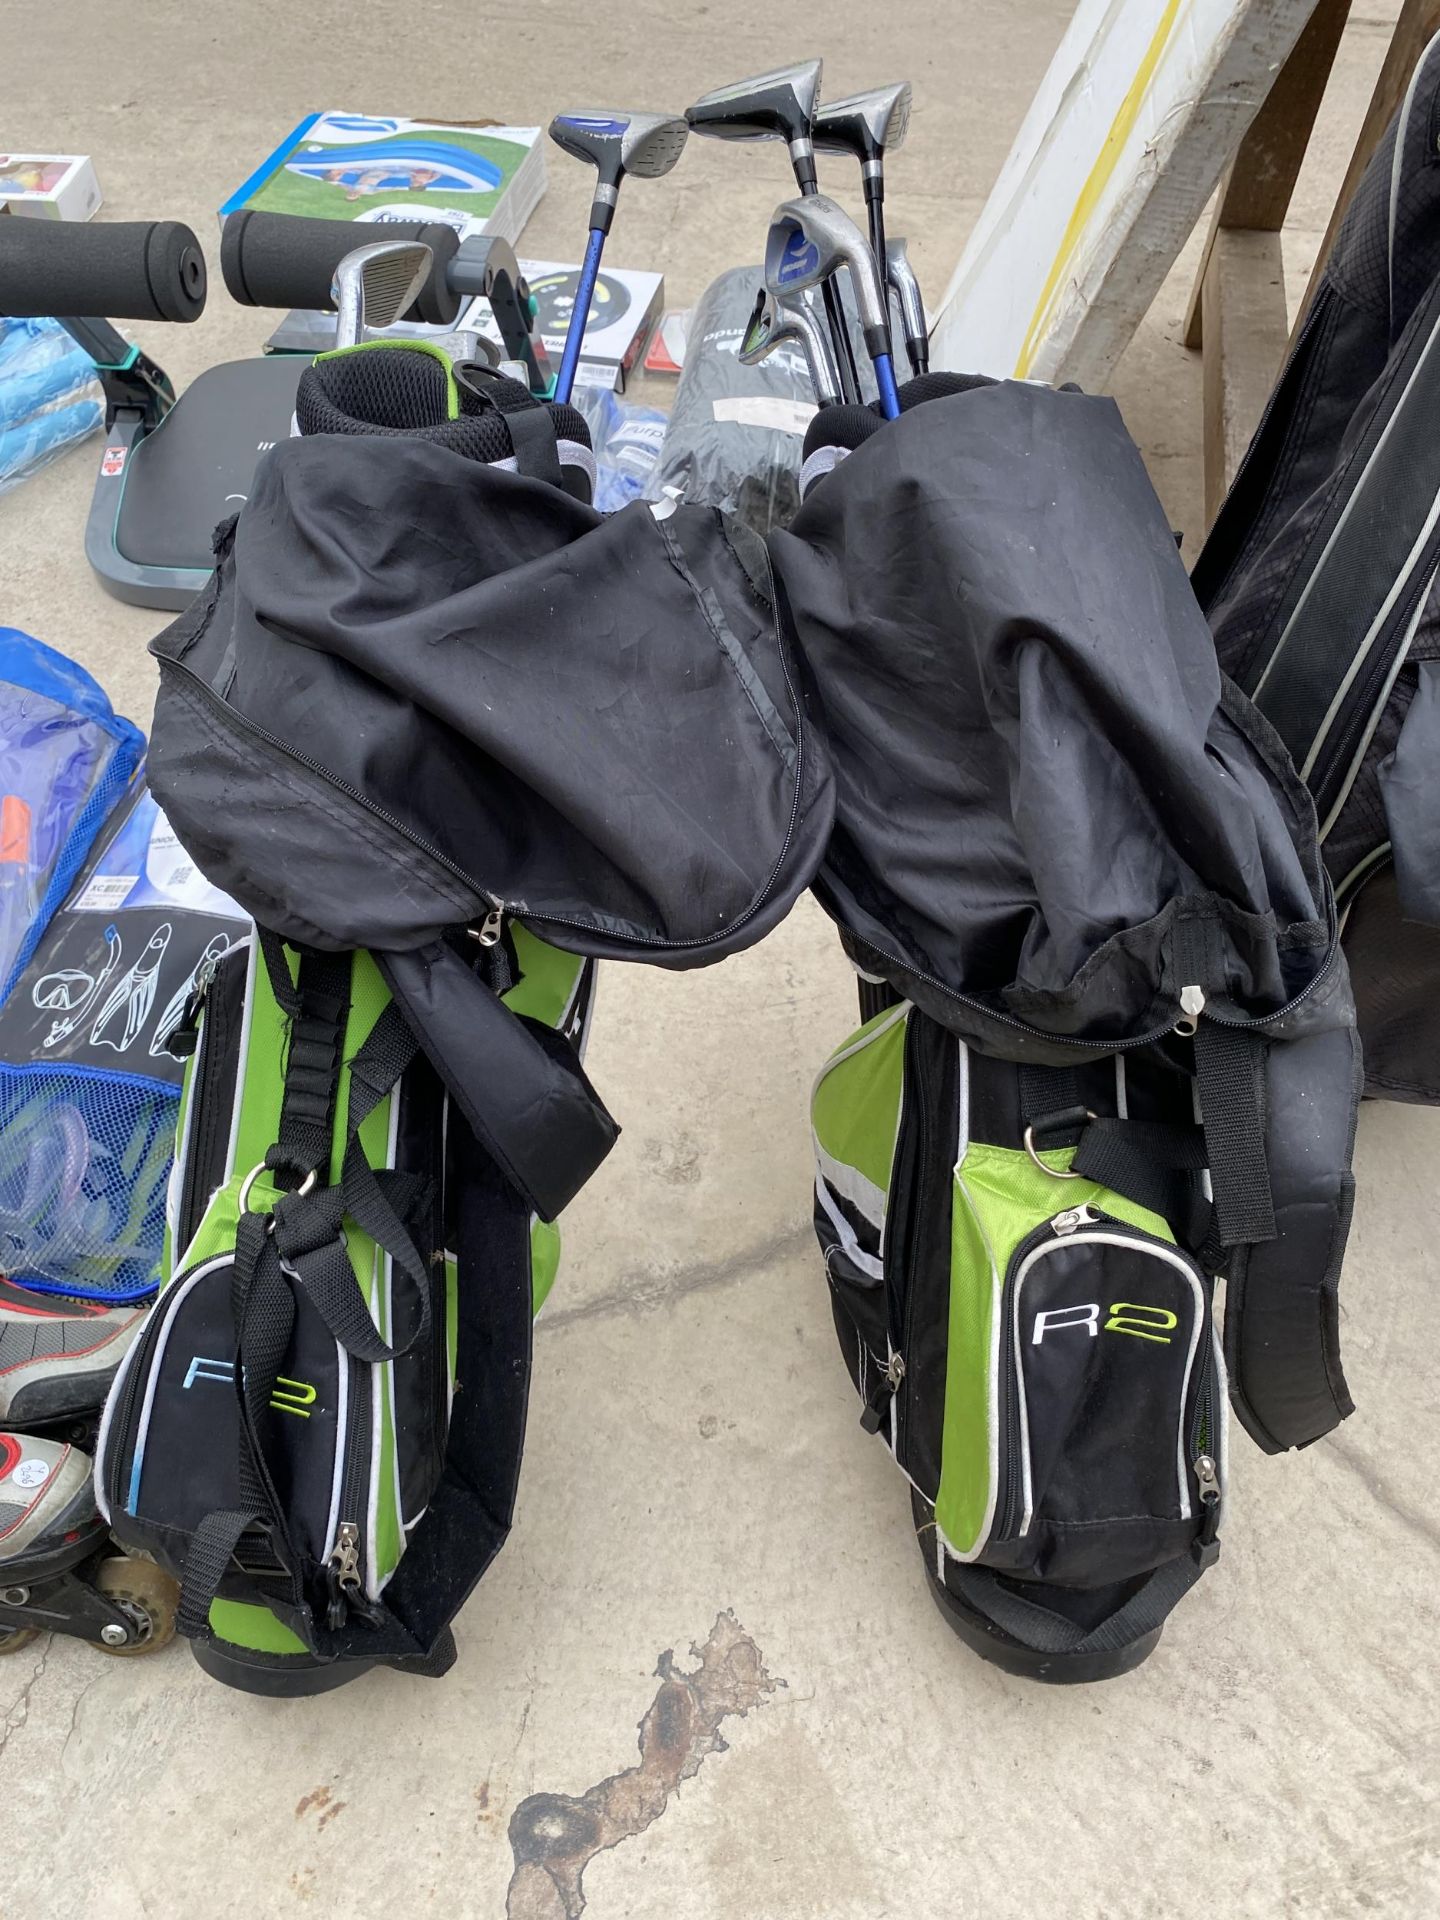 TWO CHILDRENS GOLF BAGS AND AN ASSORTMENT OF CHILDRENS GOLF CLUBS - Image 4 of 4